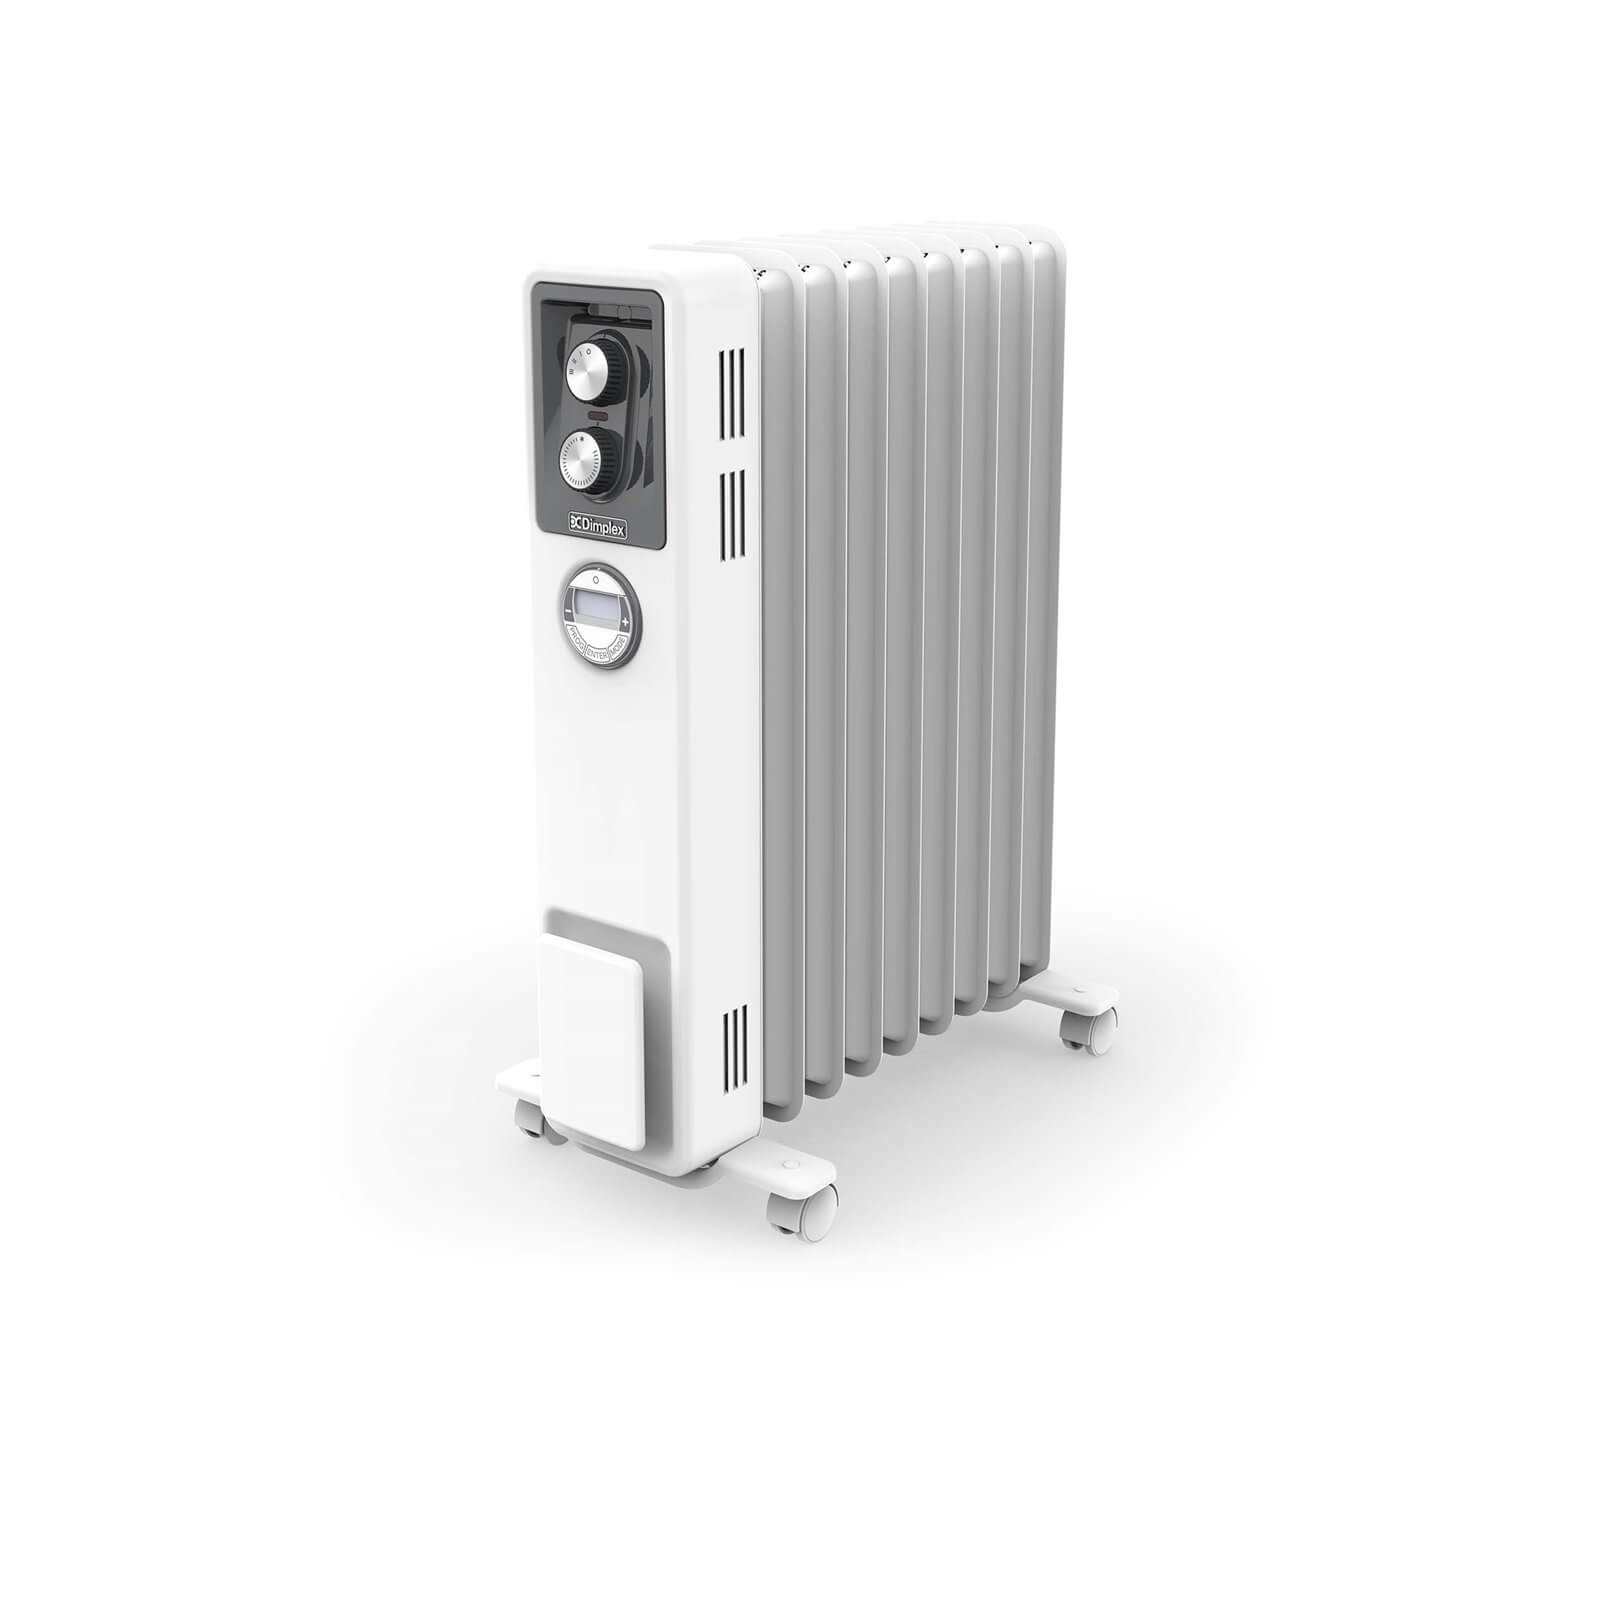 Dimplex 2kW Oil Free radiator with 24 hour timer - White